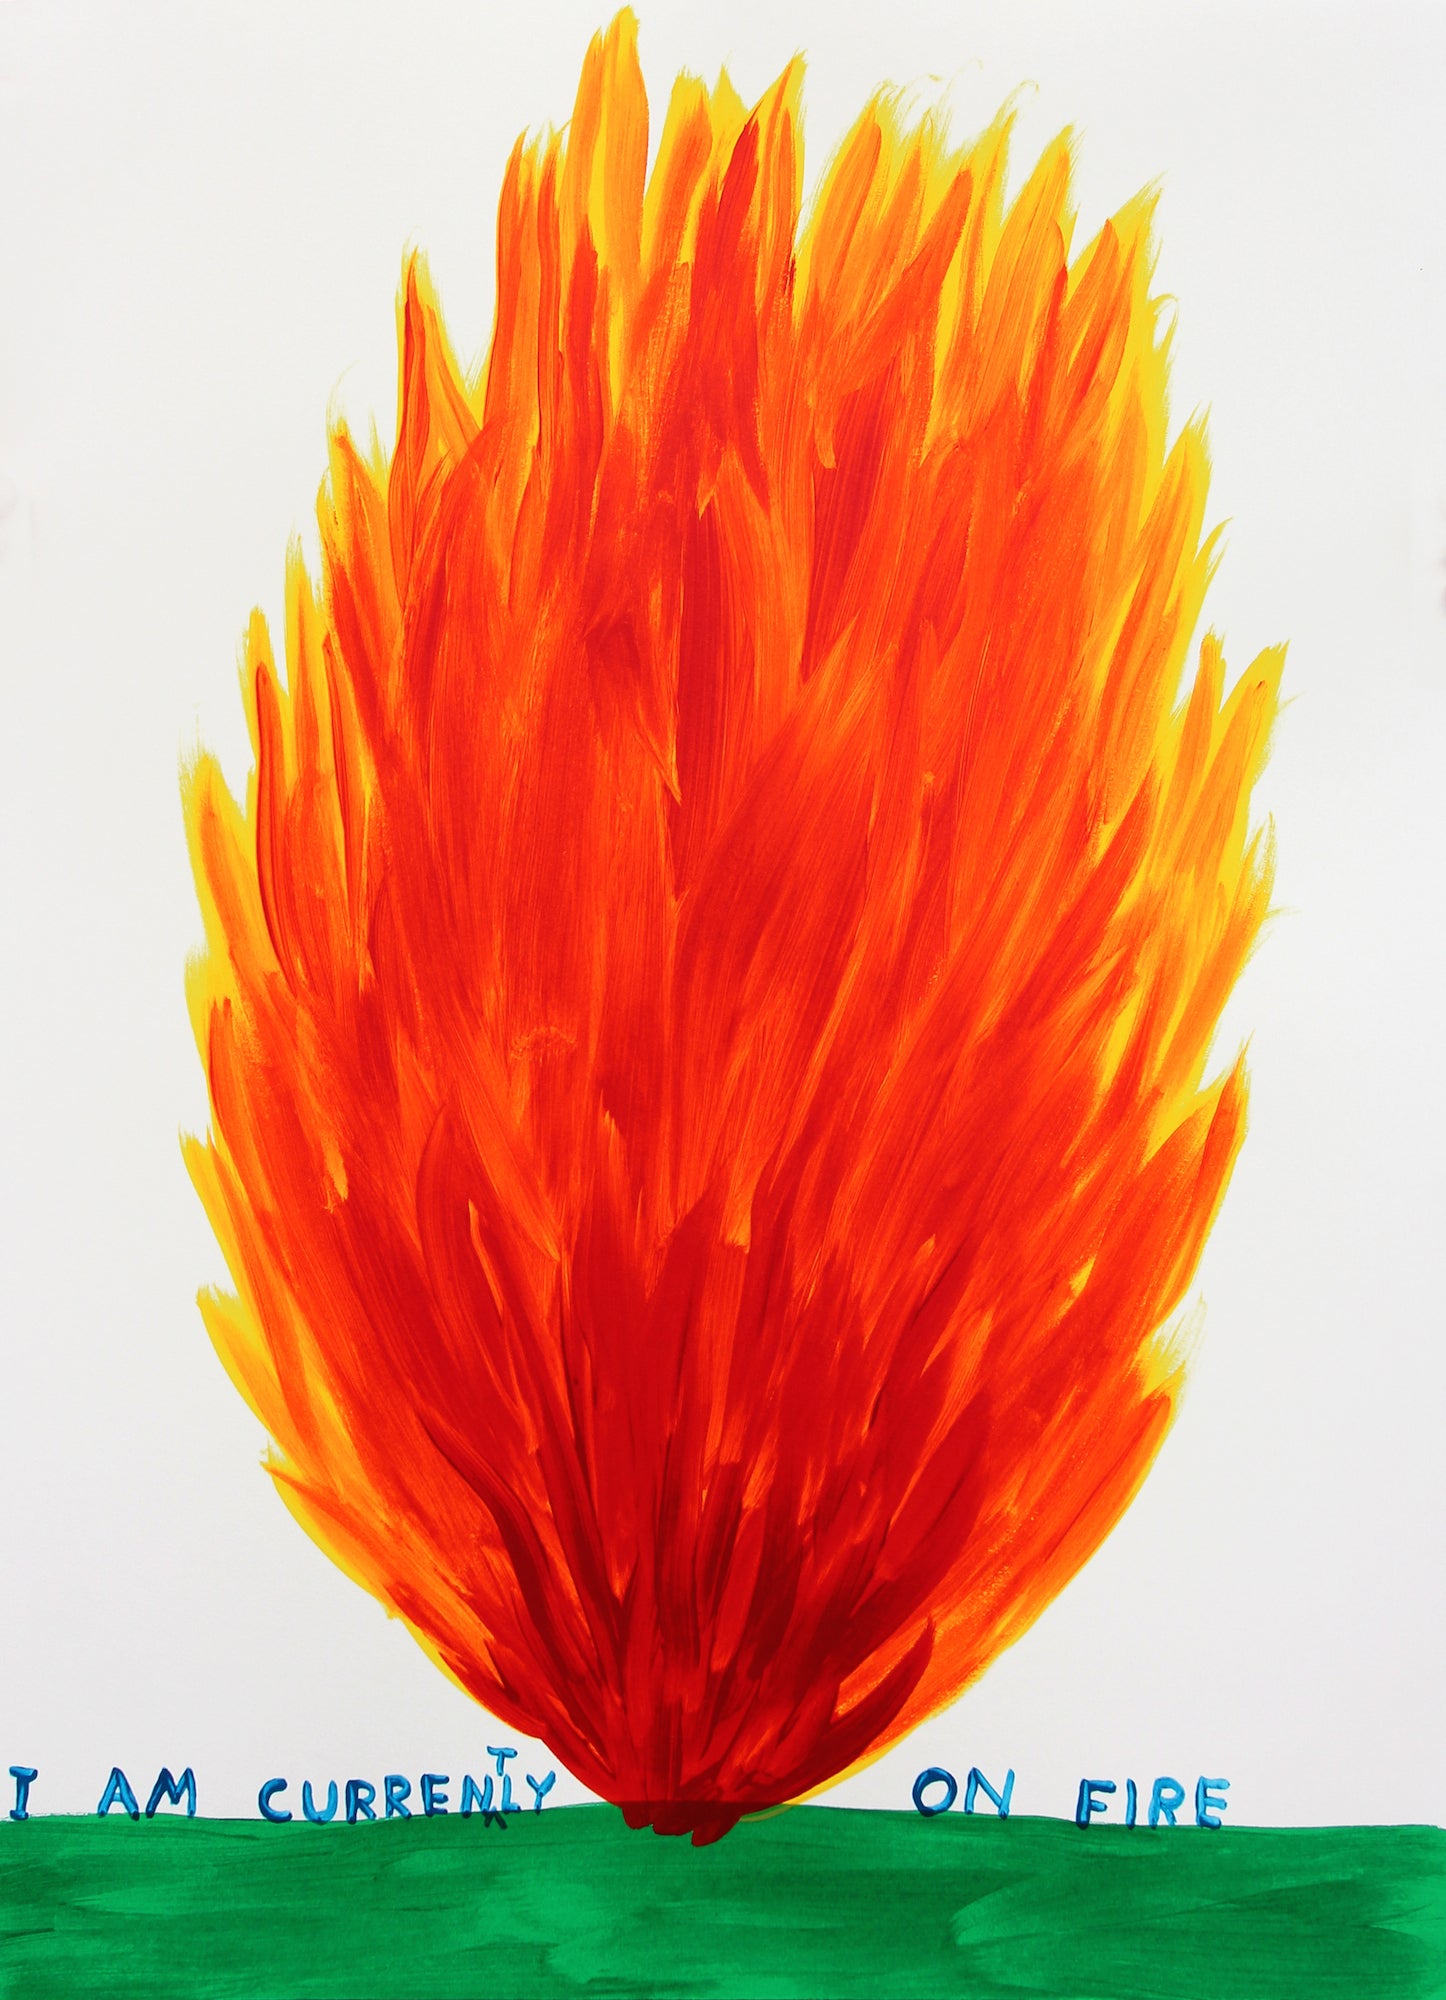 I Am Currently On Fire, 2018 by David Shrigley is a limited edition, 15 colour screenprint with varnish overlays. Discover the full collection of available artworks at Jealous. Purchase online or explore more prints on the gallery website.